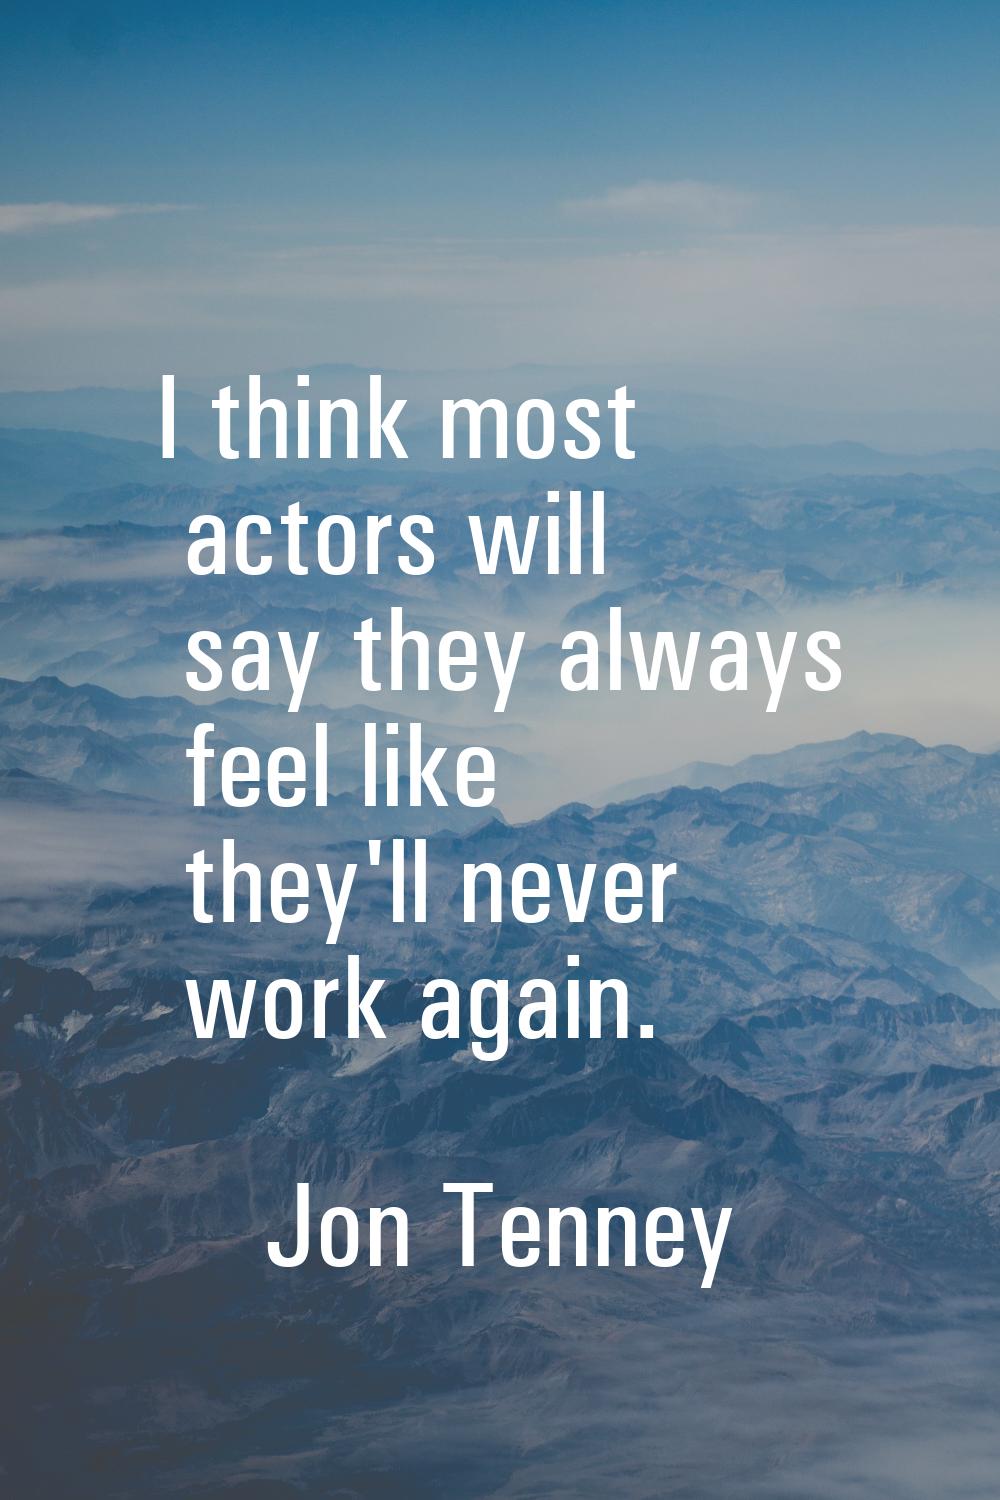 I think most actors will say they always feel like they'll never work again.